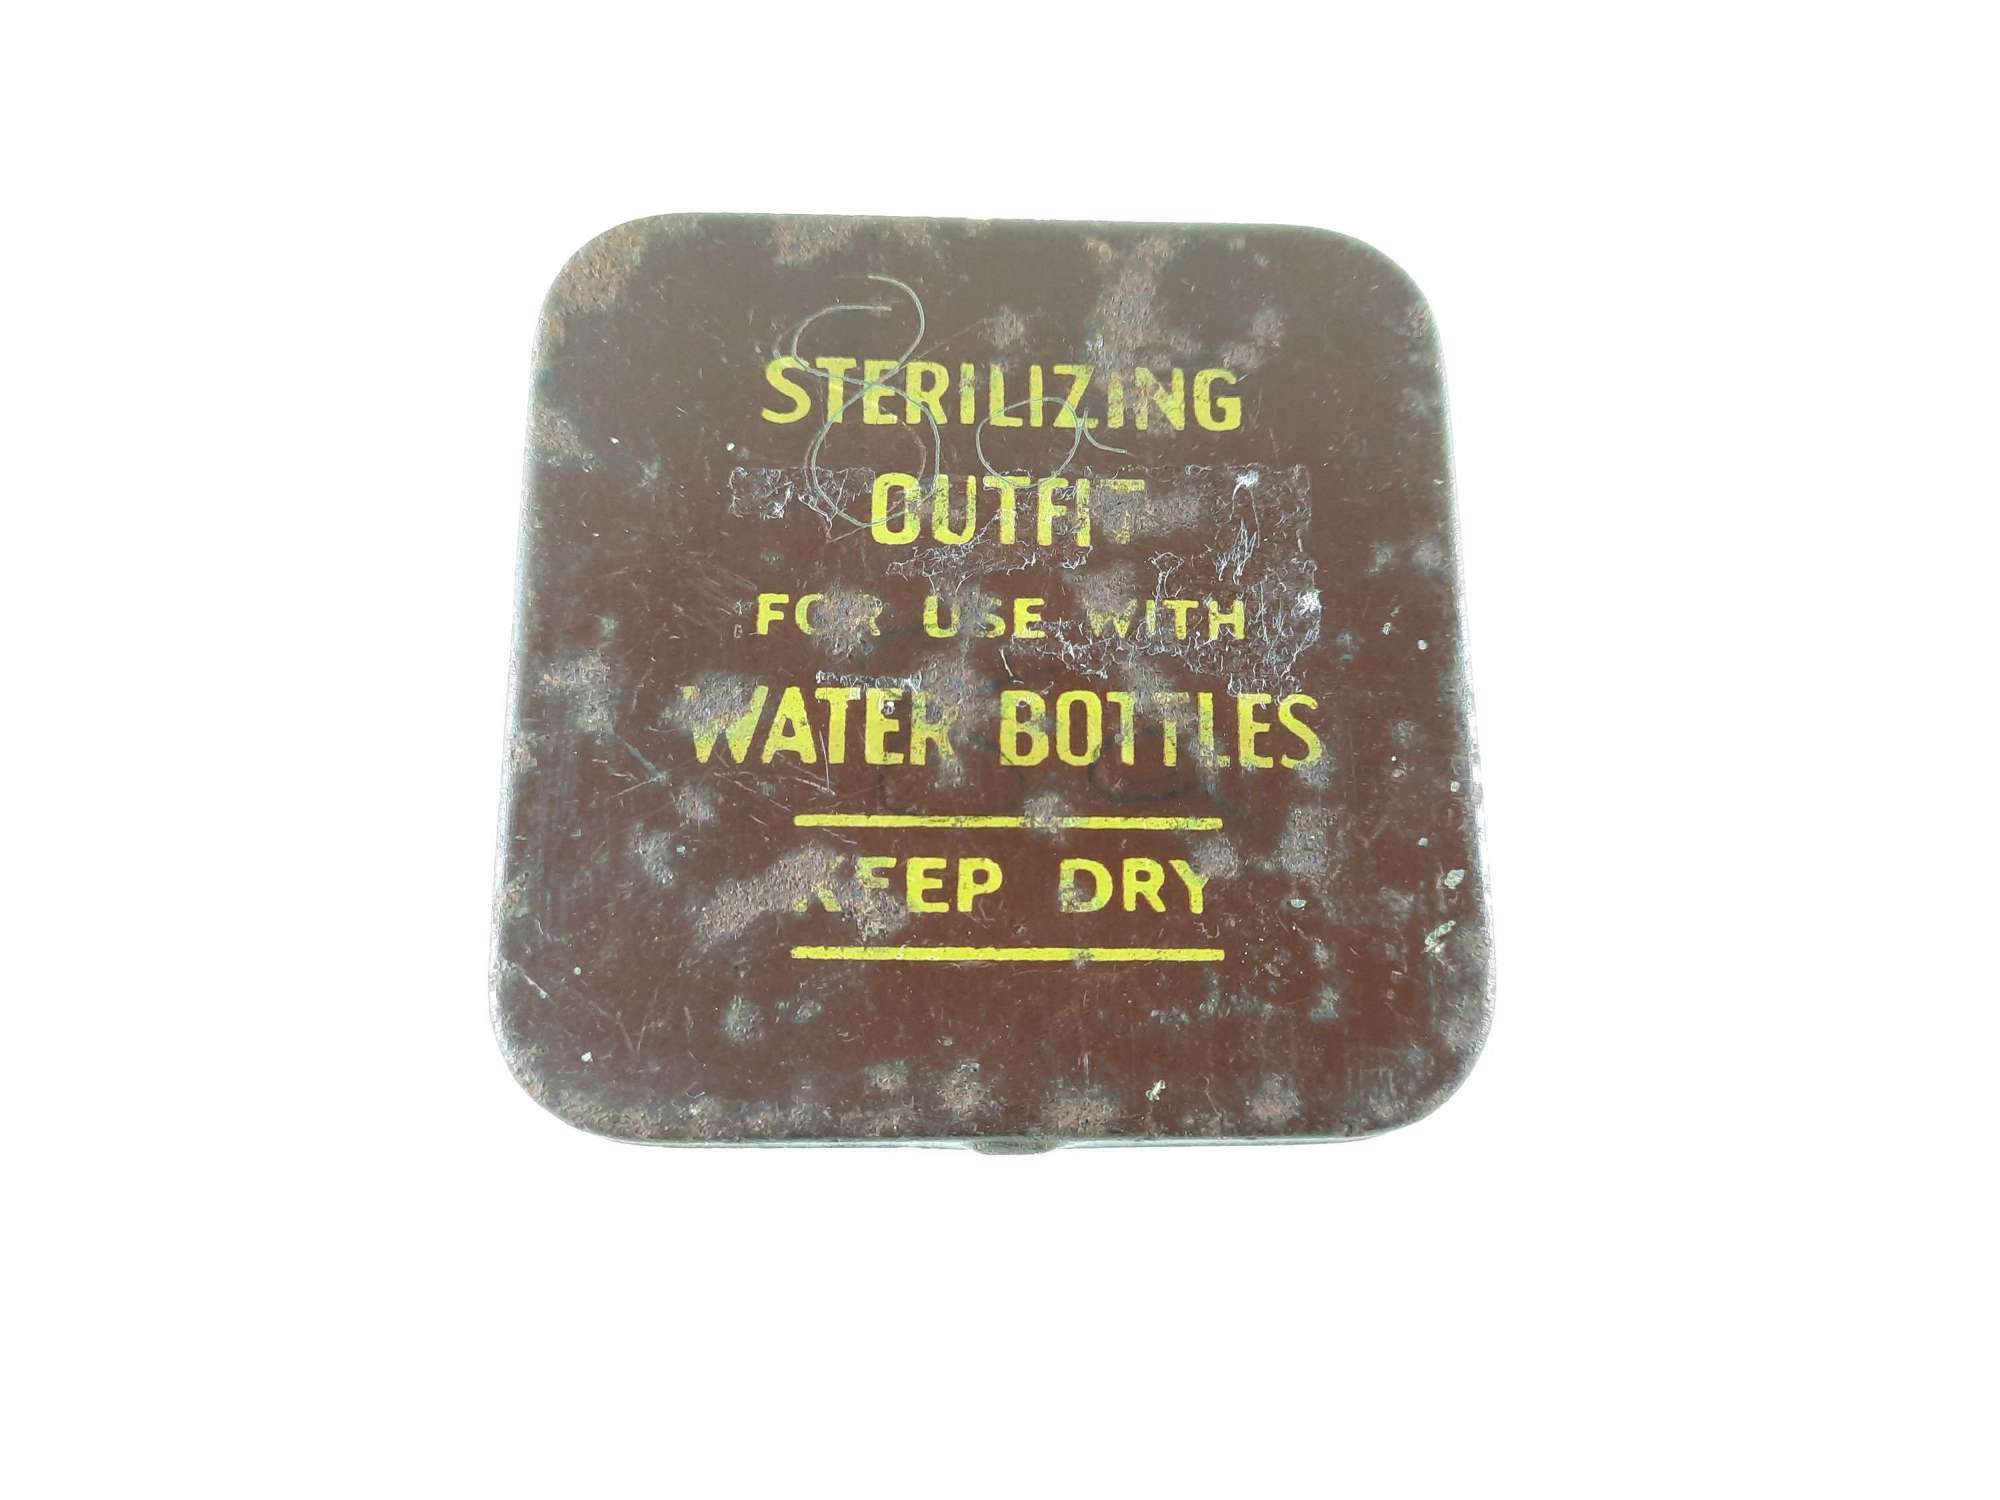 Ww2 British Army Sterilizing Outfit For Water Bottles Tin